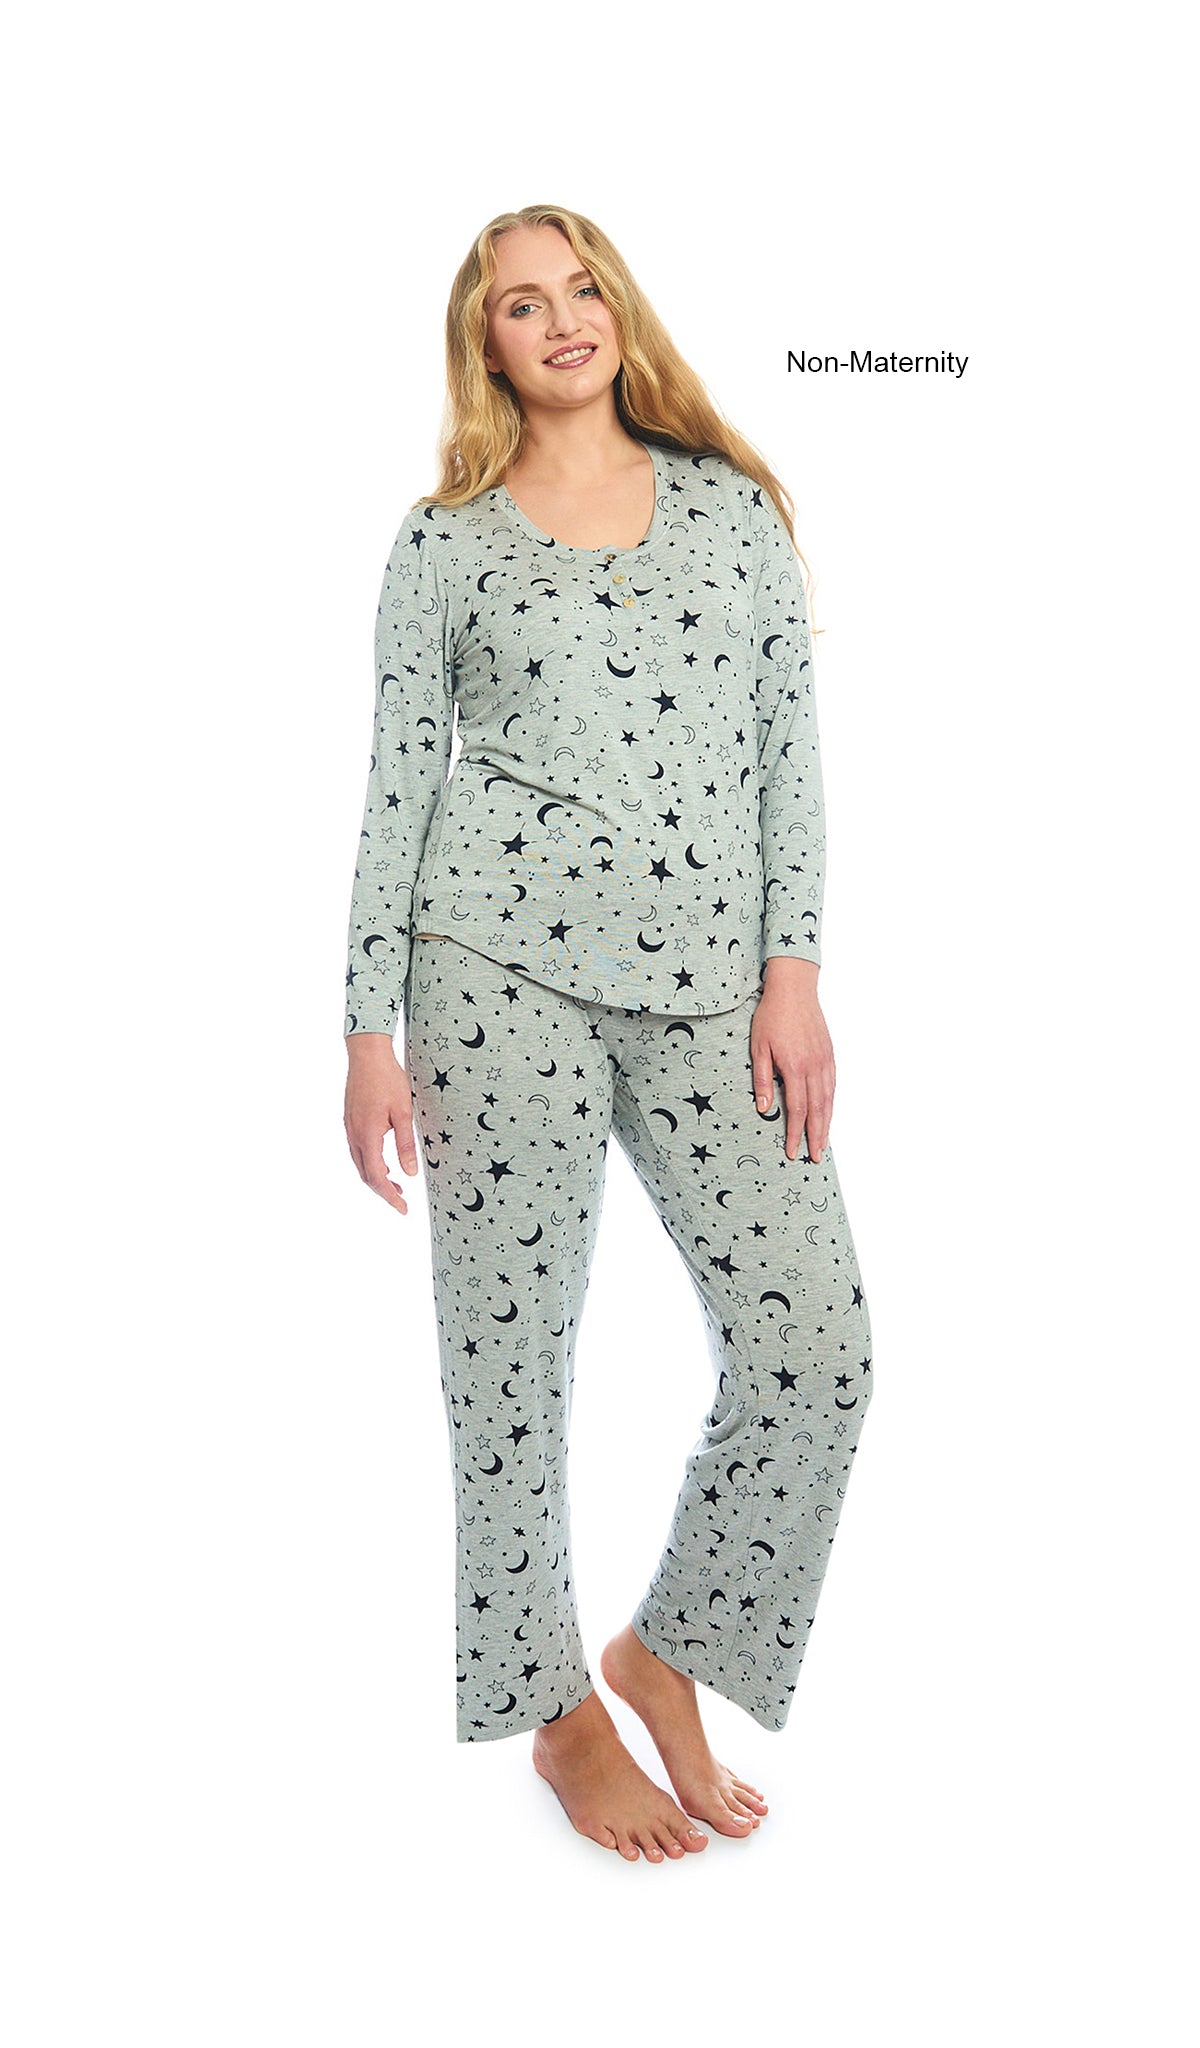 Twinkle Night Laina 2-Piece Set. Woman wearing button front placket long sleeve top and pant as non-maternity.